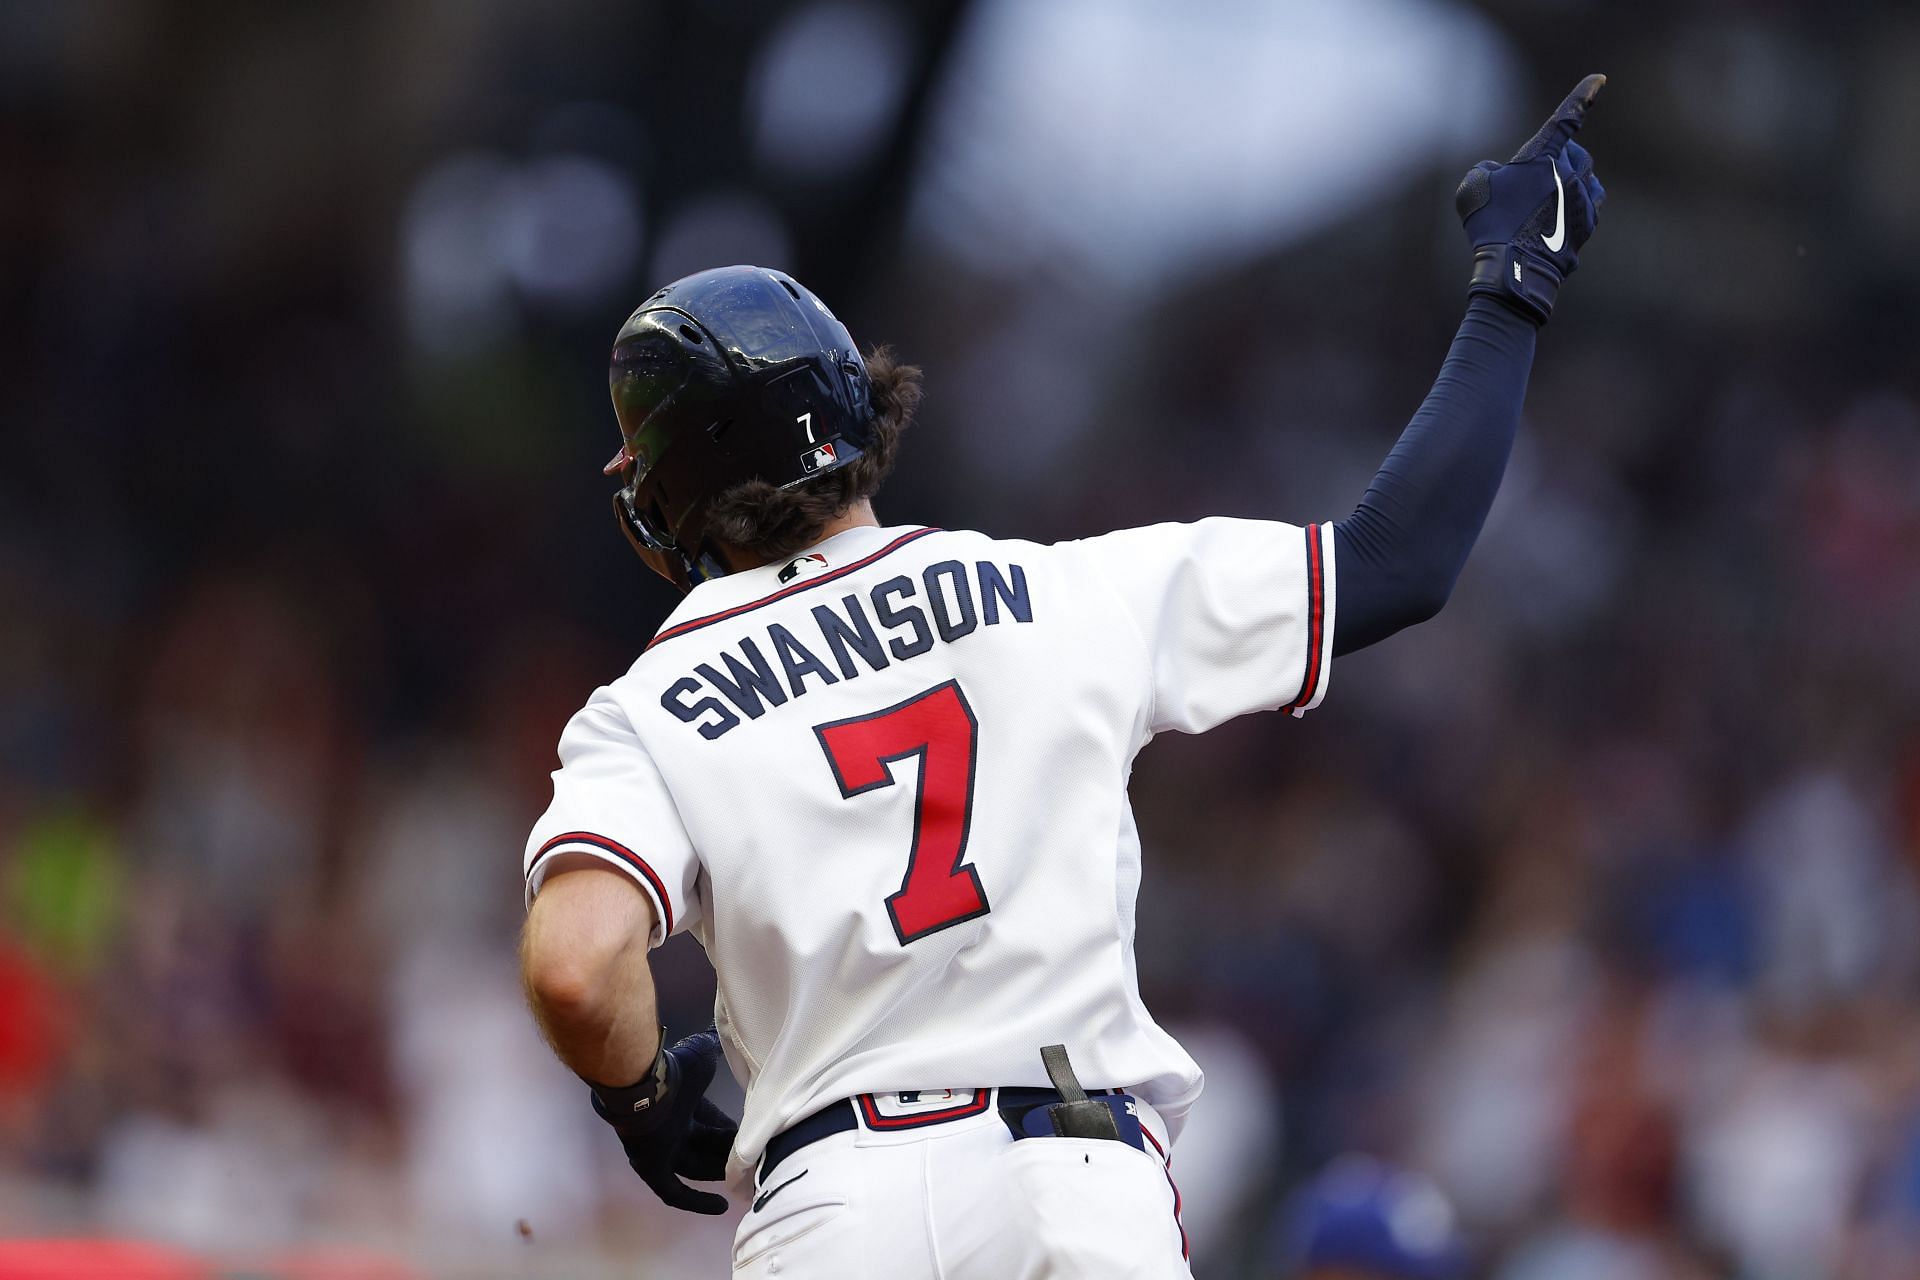 Dansby Swanson of the Atlanta Braves rounds first after hitting a two-run home run.